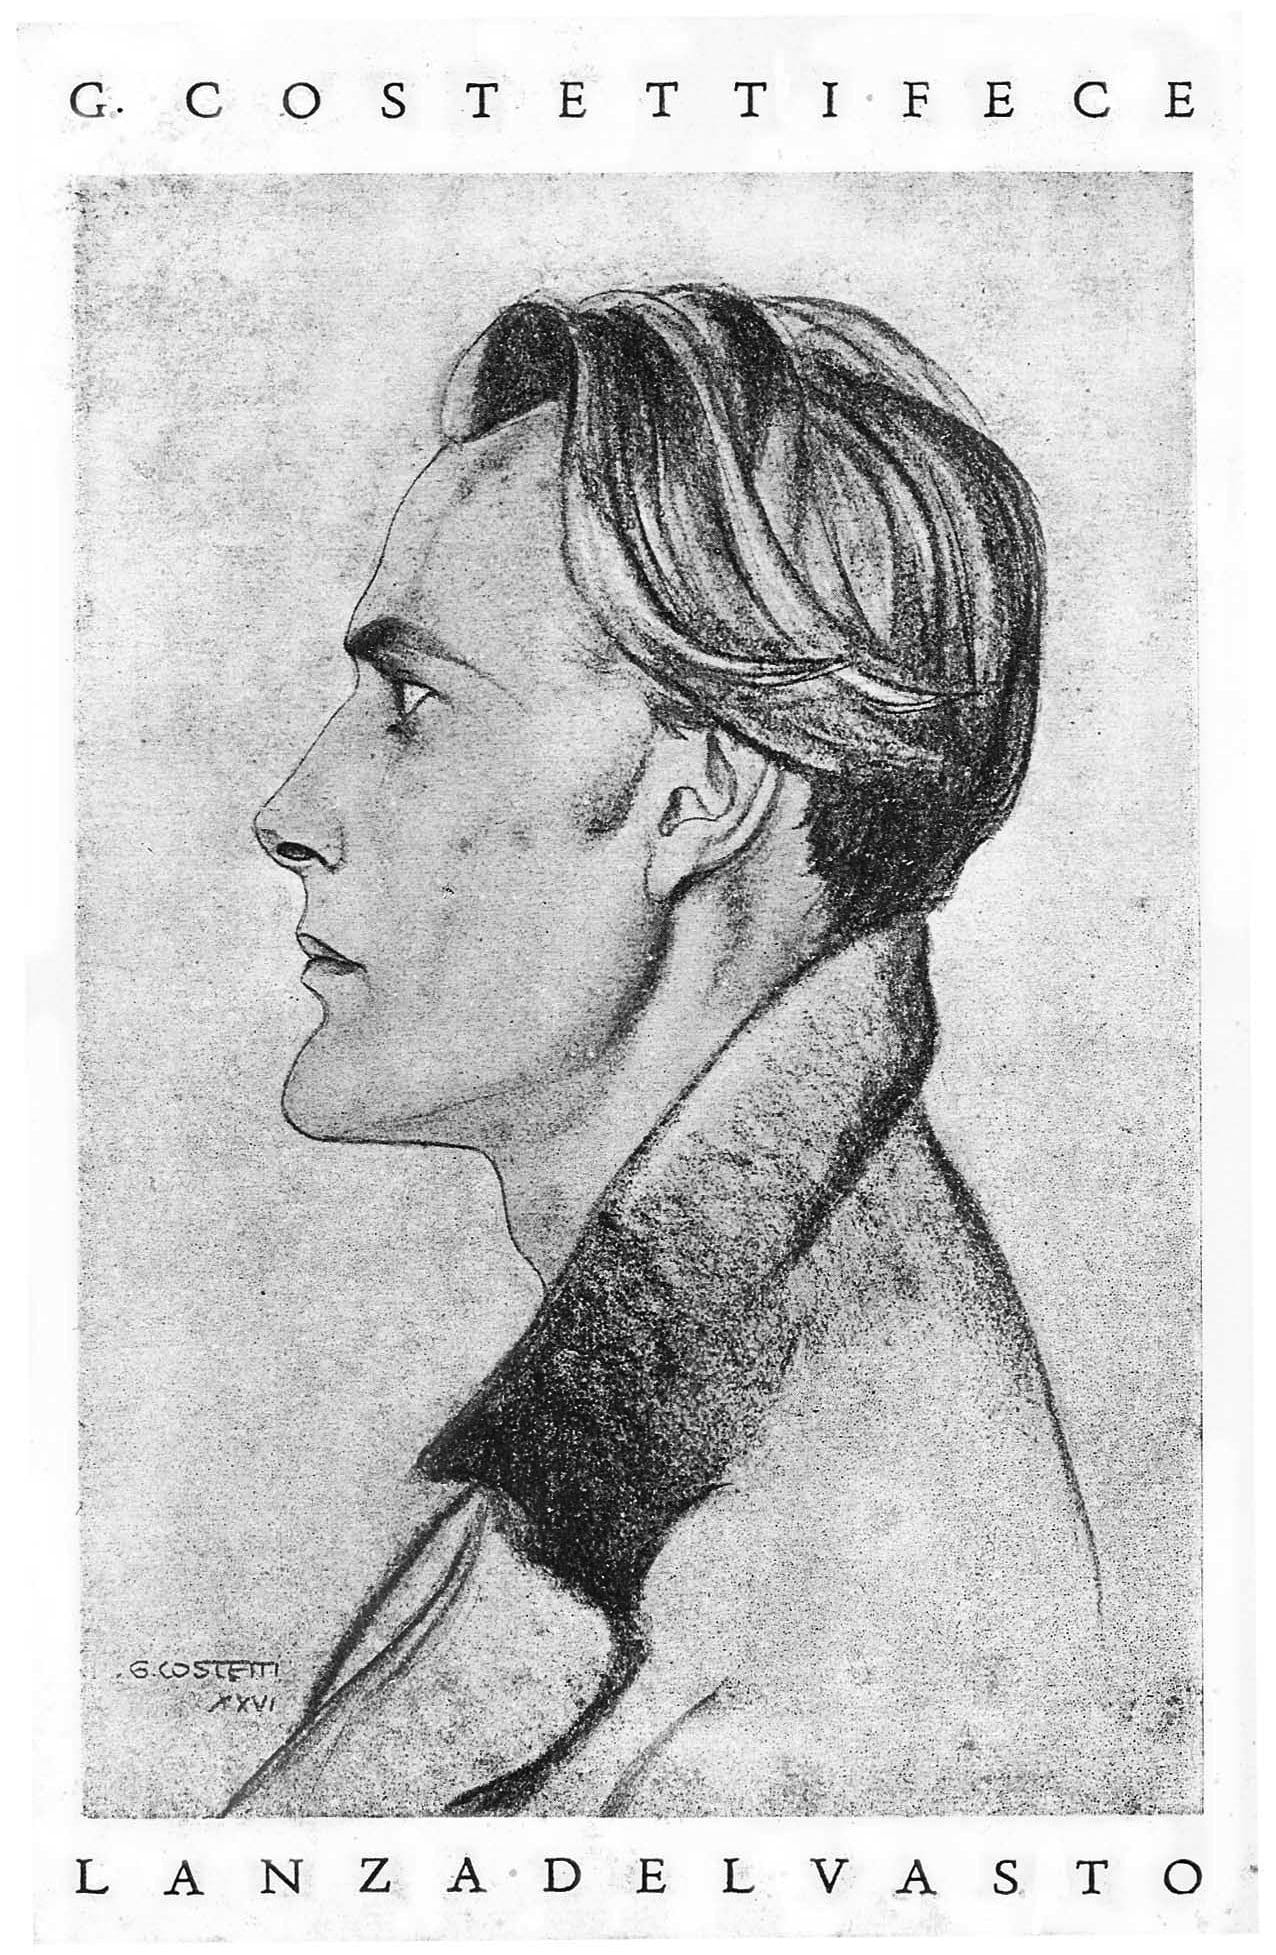 Drawing of Giovanni Costetti (Florence, 1926).